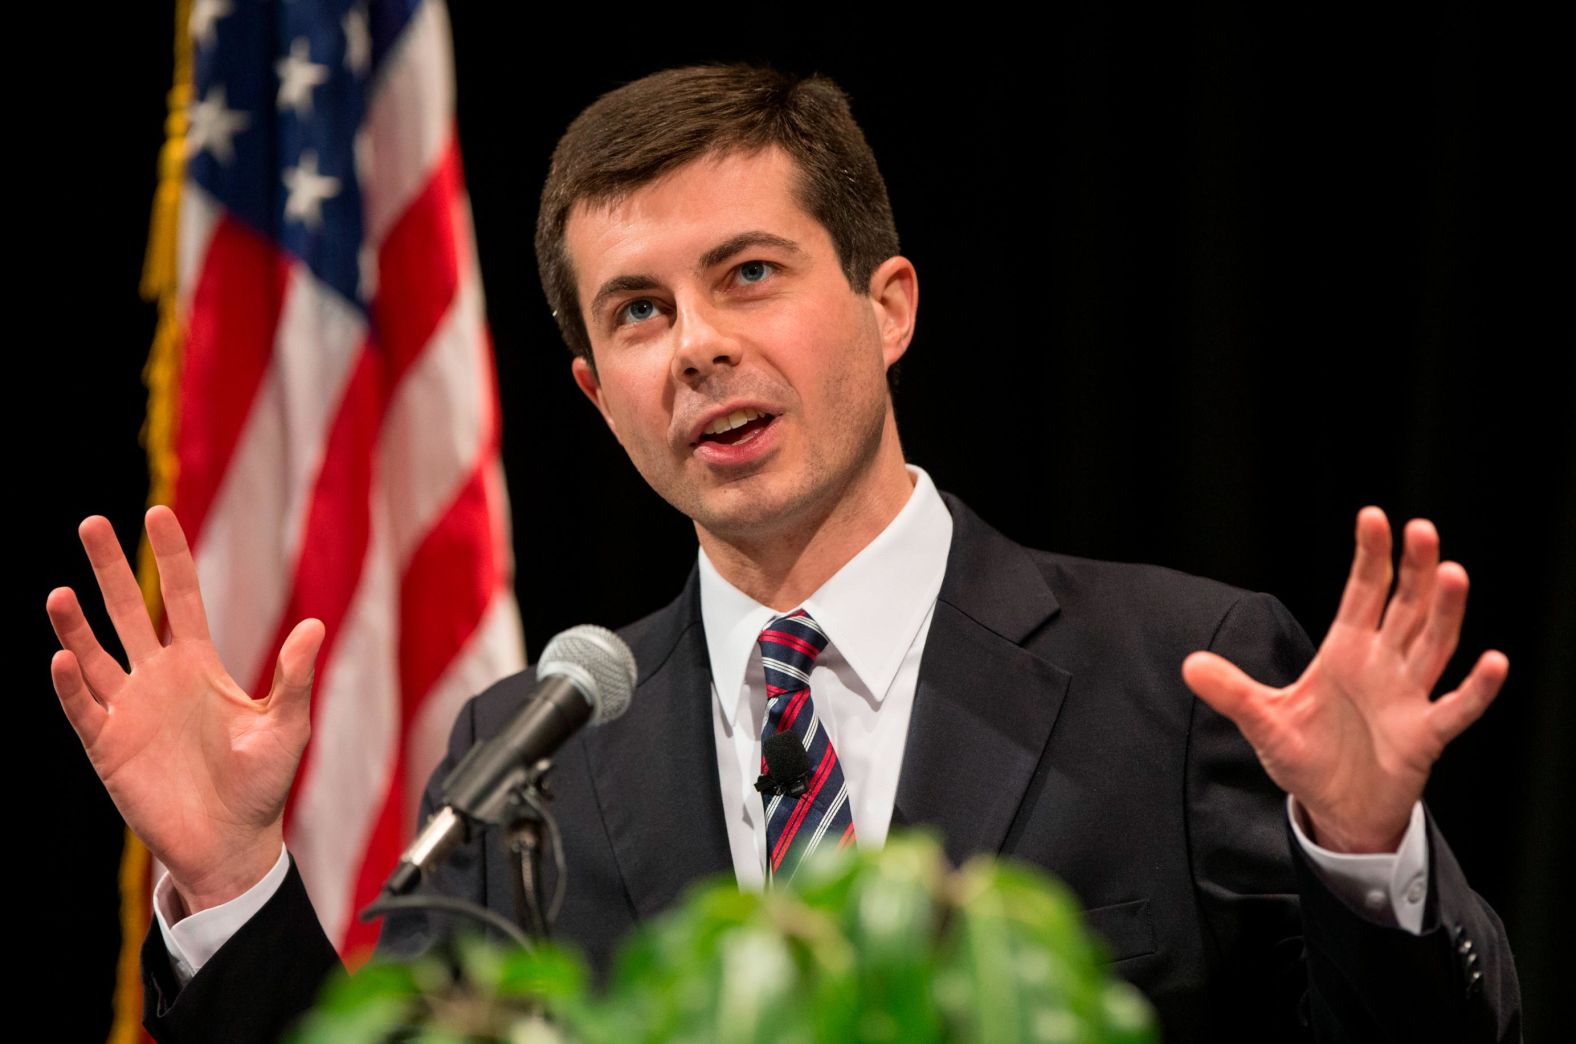 Buttigieg delivers his State of the City address in February 2014.